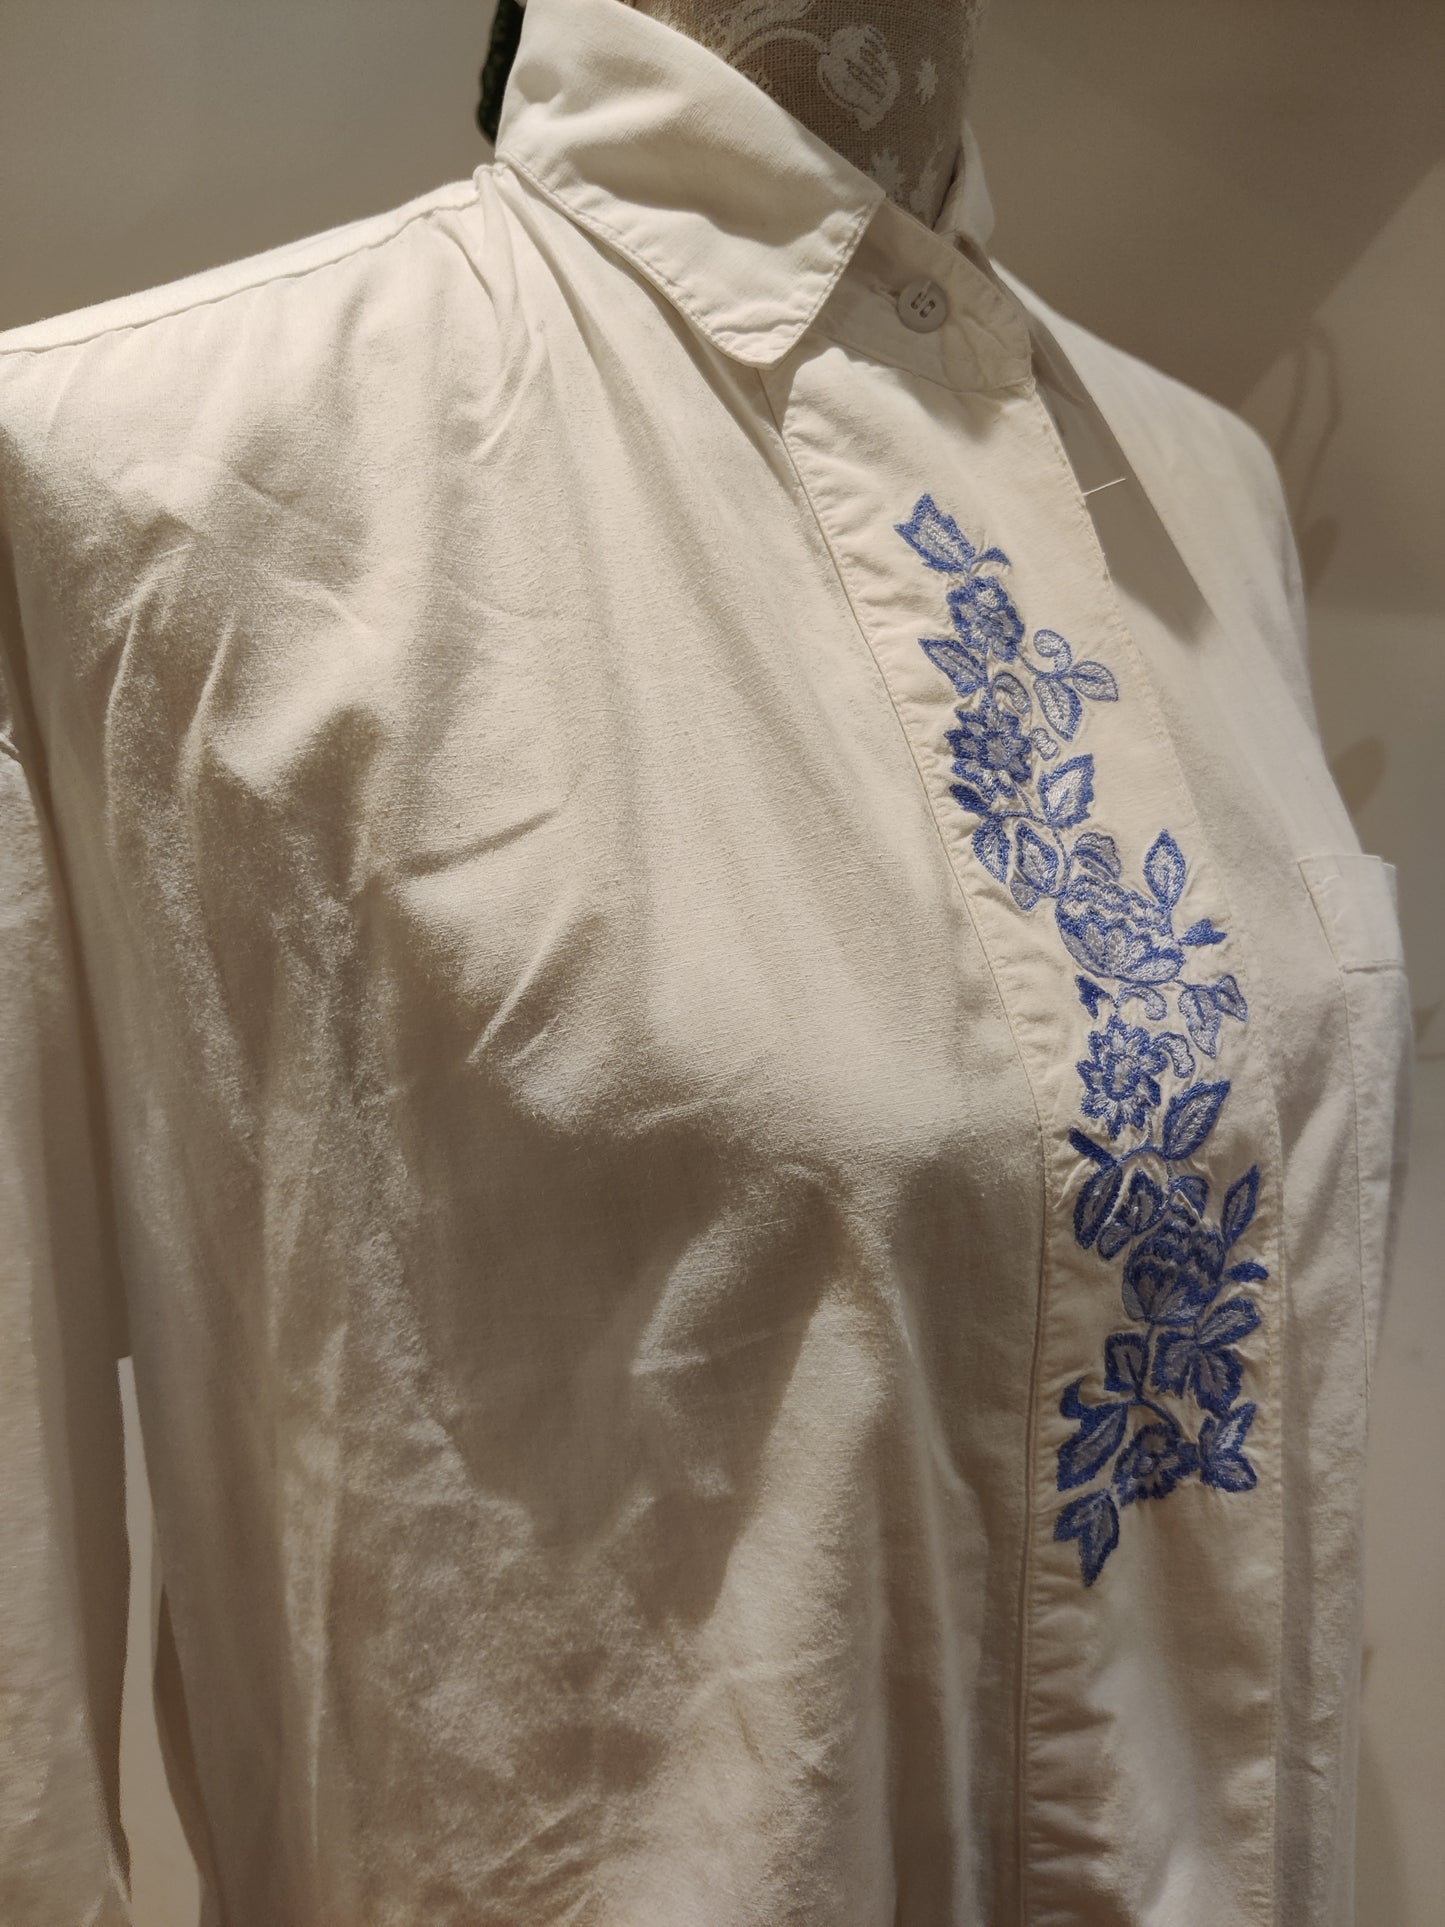 Stunning white blouse with blue embroidery. Size 18